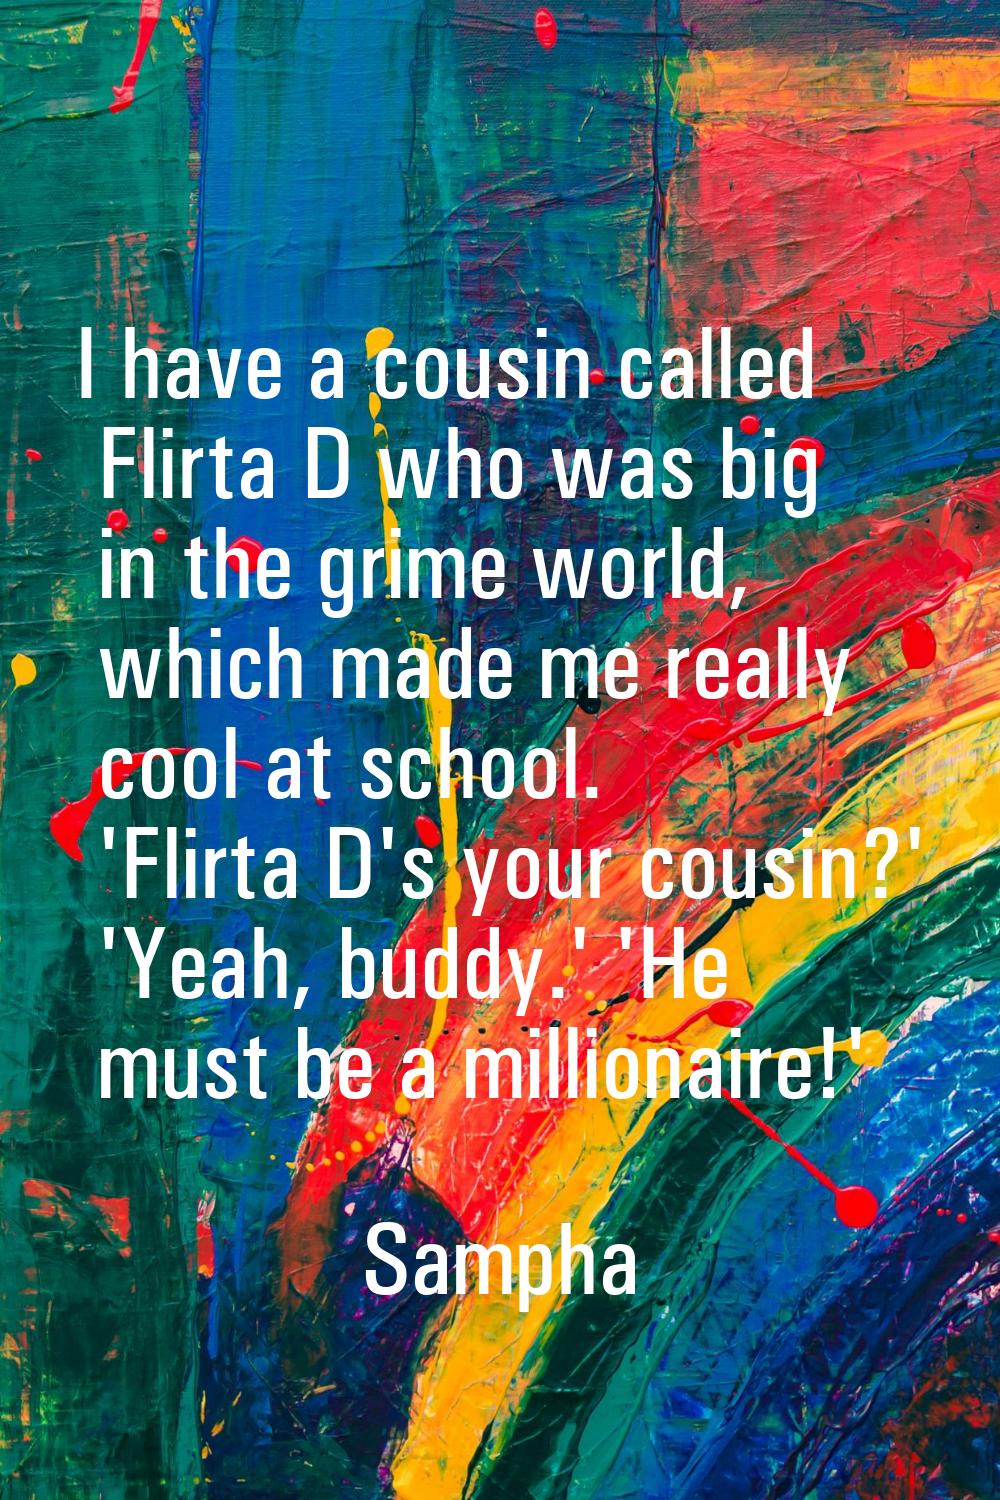 I have a cousin called Flirta D who was big in the grime world, which made me really cool at school